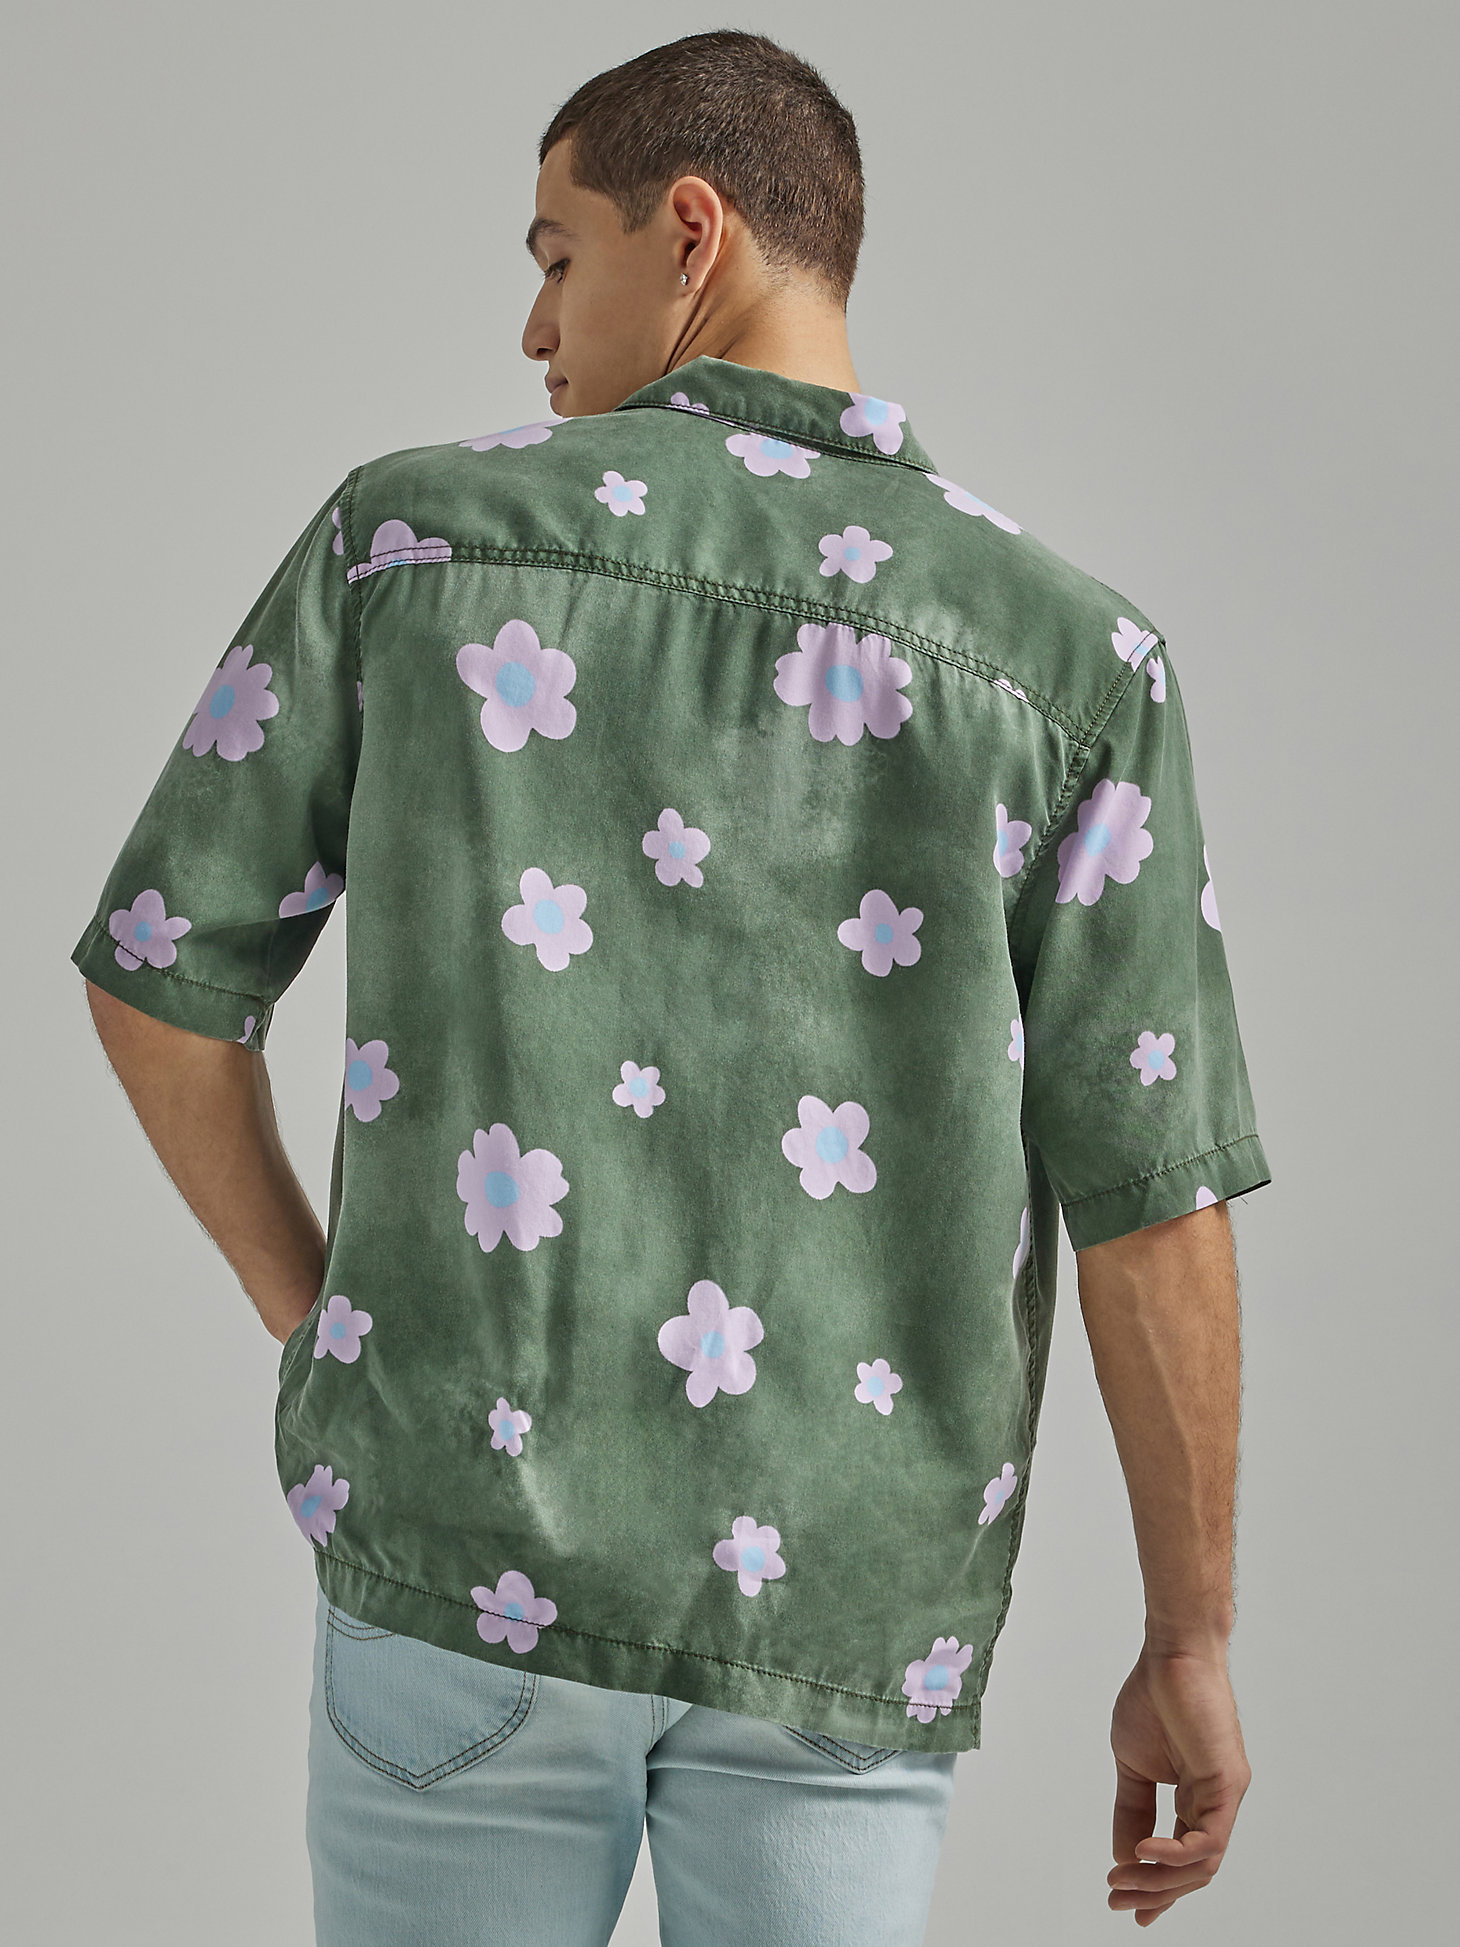 Men's Oversized Floral Shirt in Fort Green Floral alternative view 1